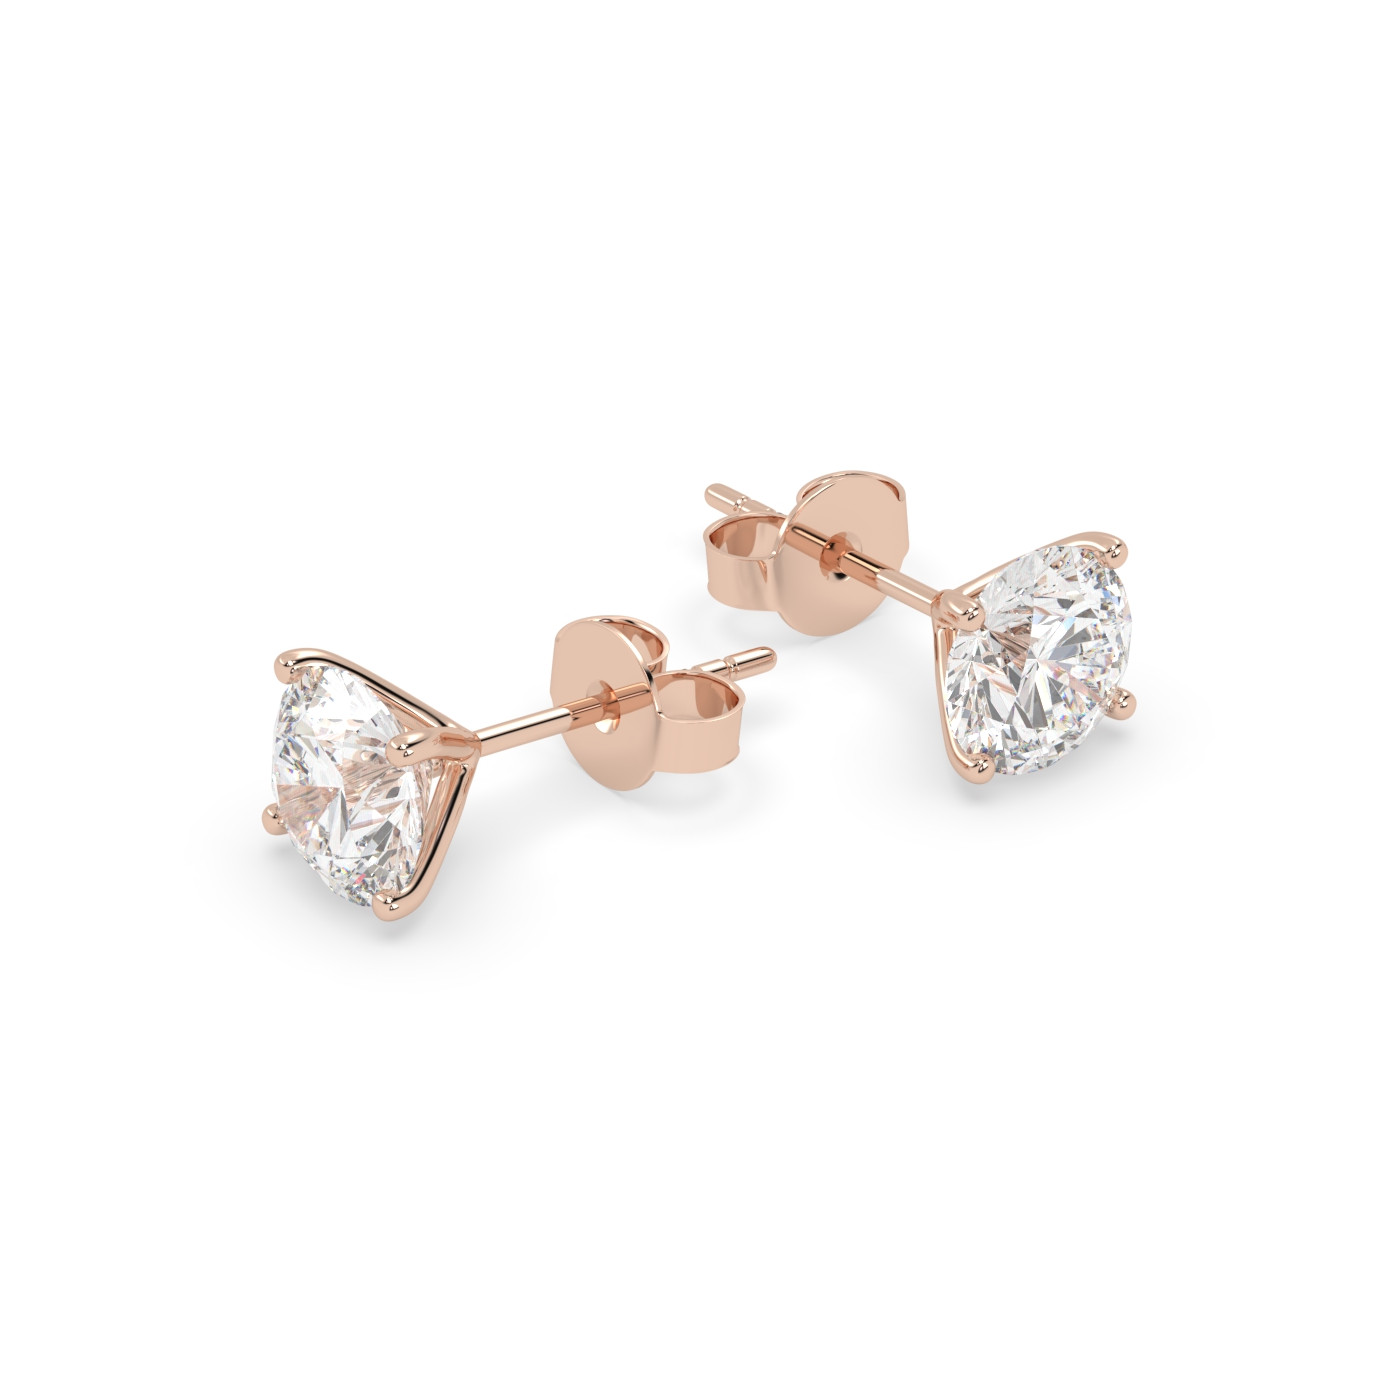 18k rose gold  1.4carat round stud earrings with butterfly back